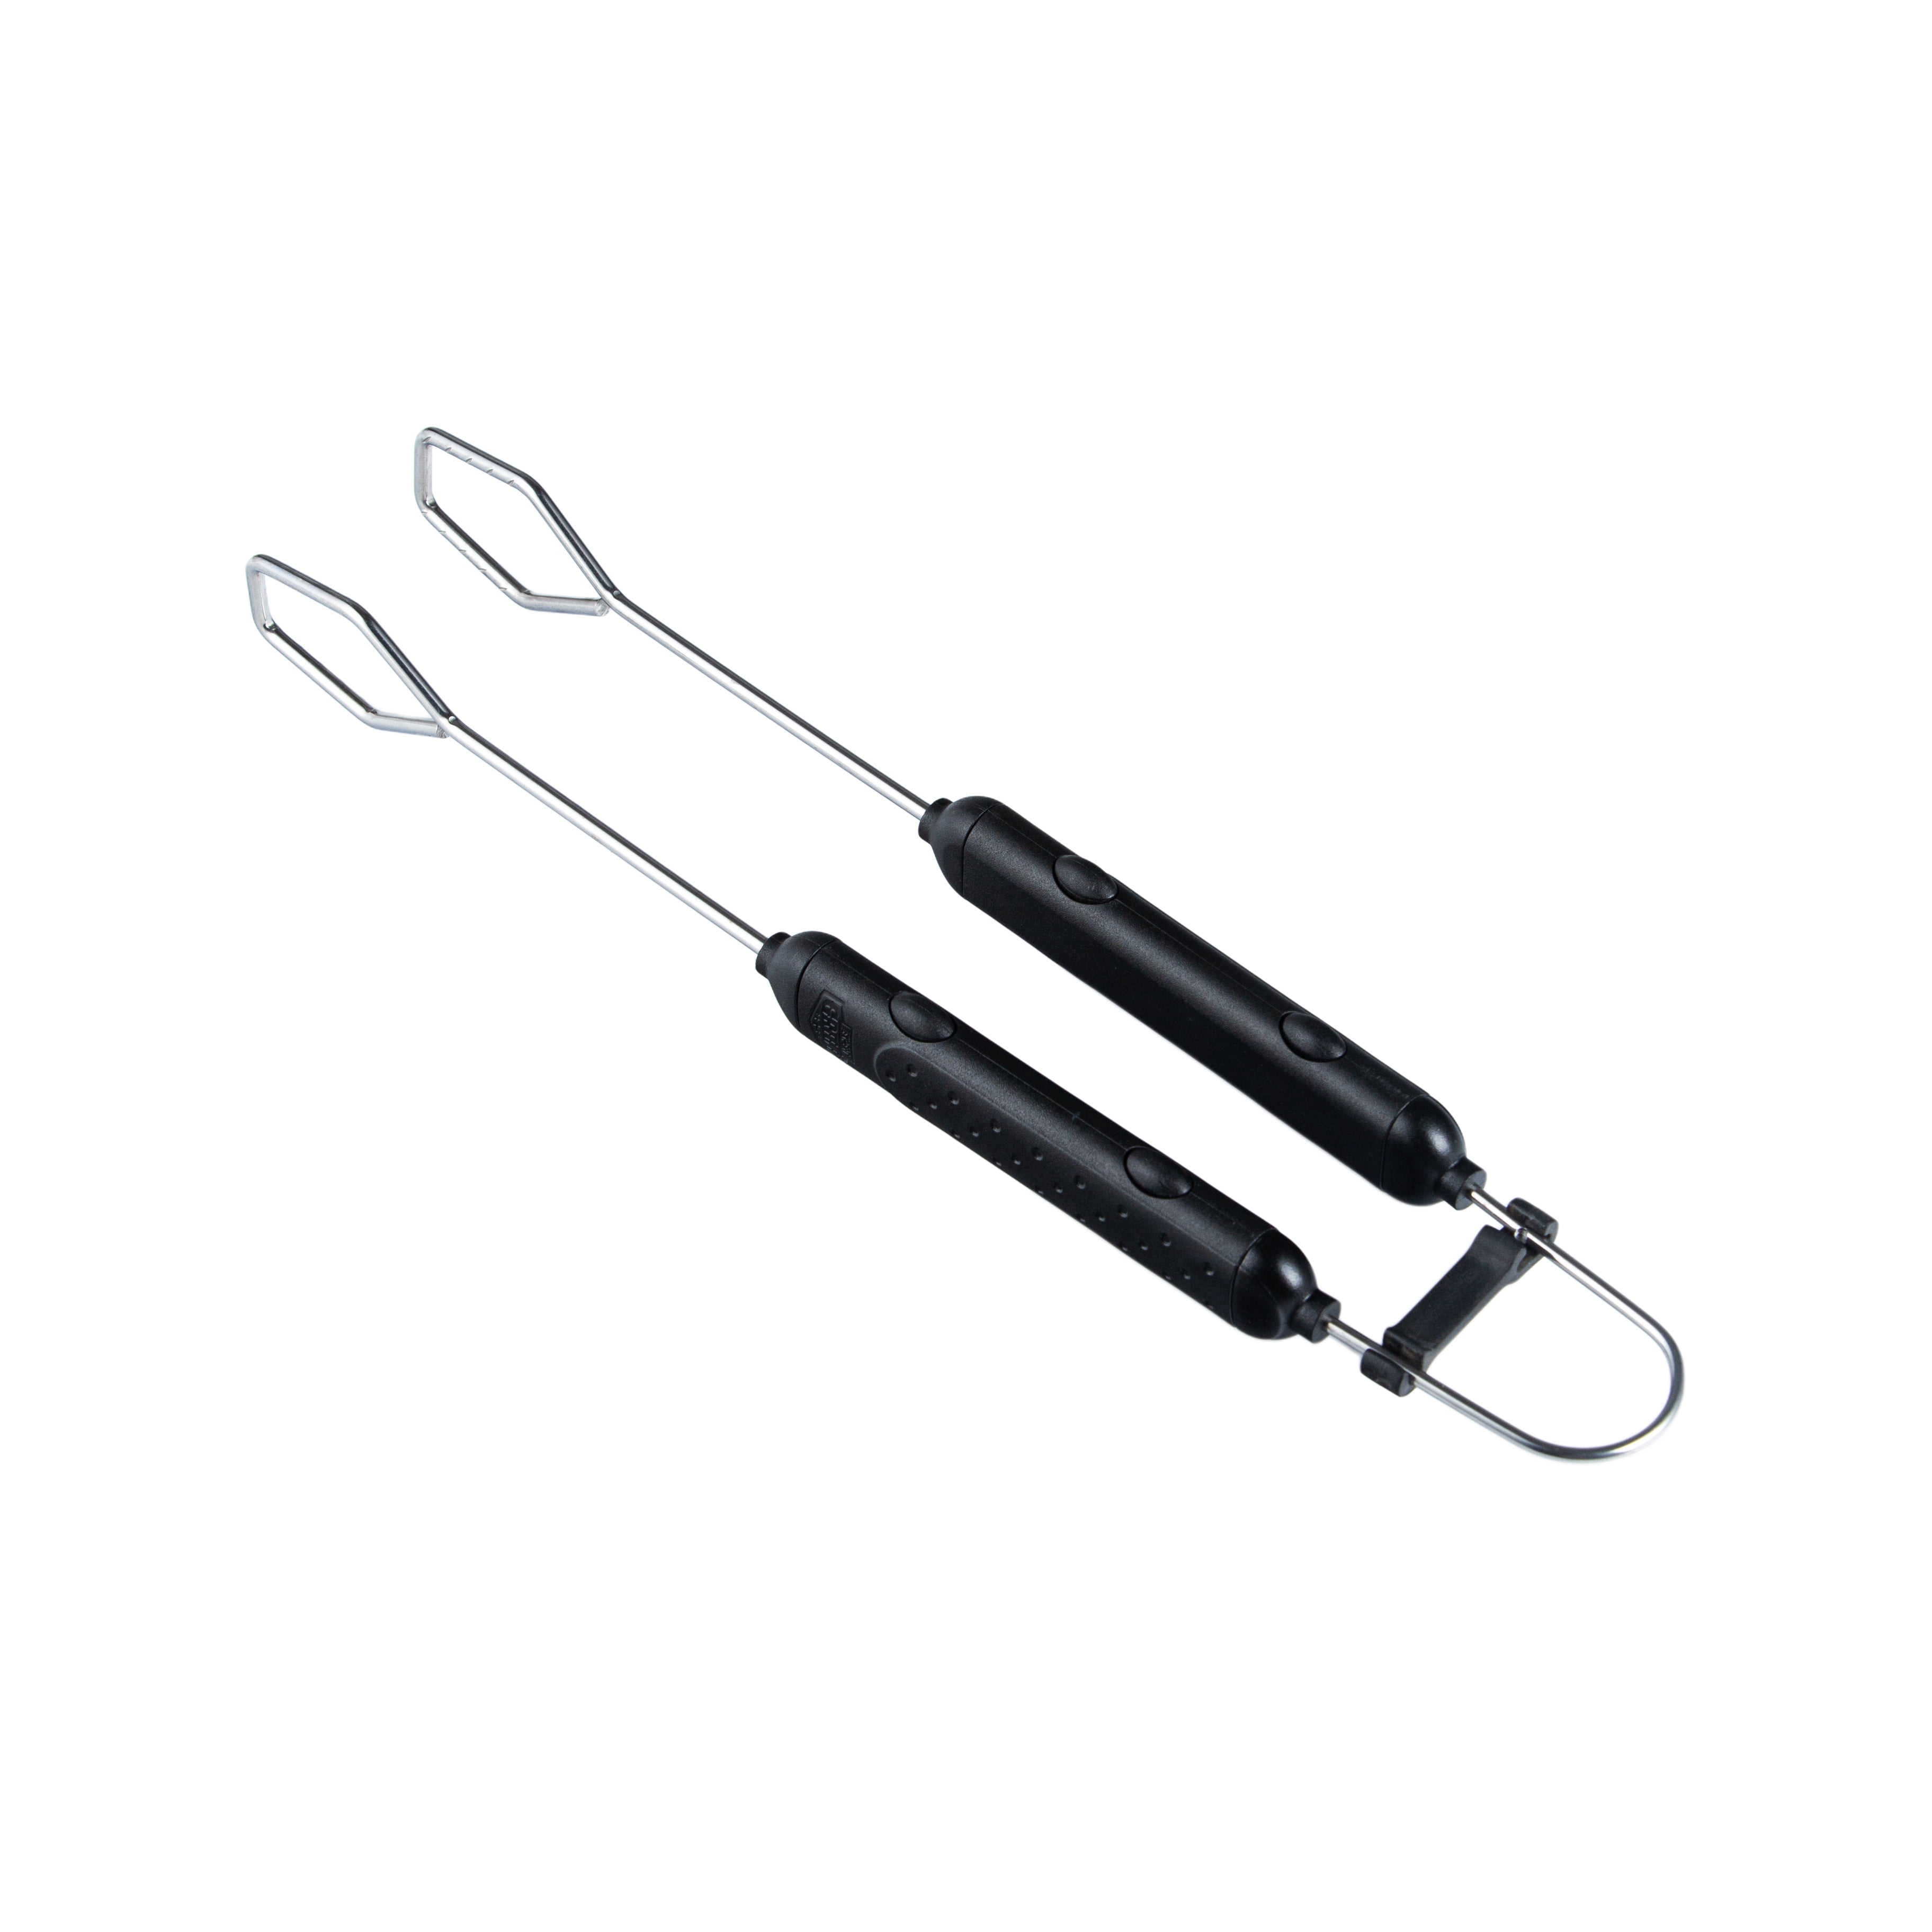 Expert Grill Stainless Steel Locking Barbecue Tongs with Detachable Handle